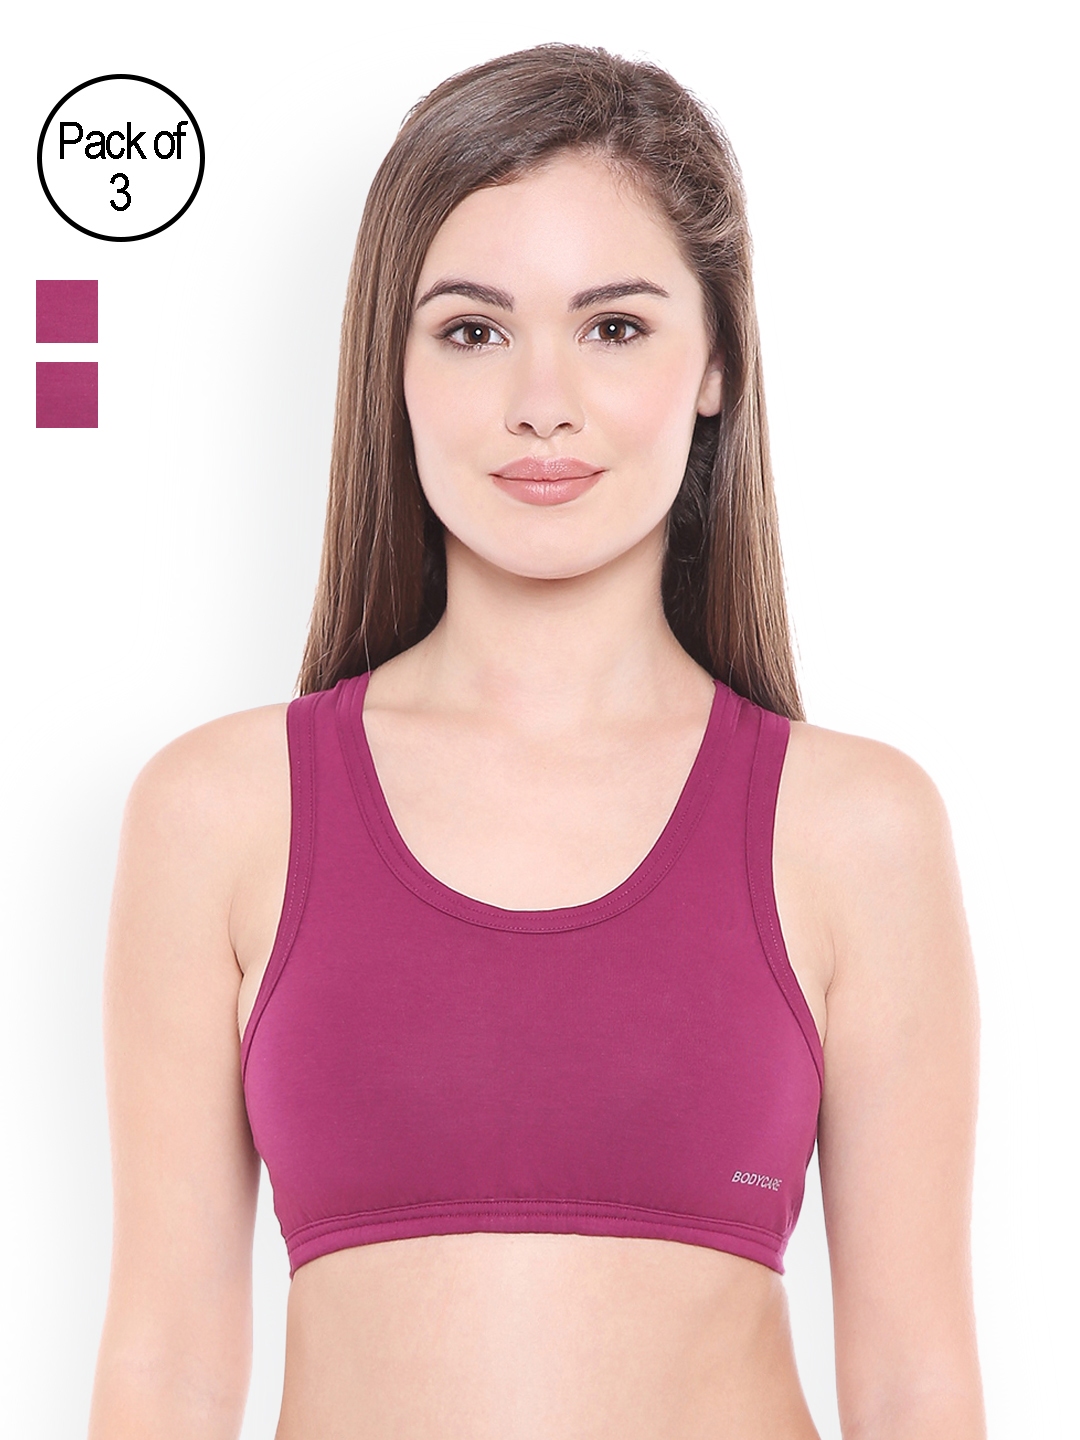 Bodycare Pack of 3 Full Coverage Sports Bras E1610WIWIWI